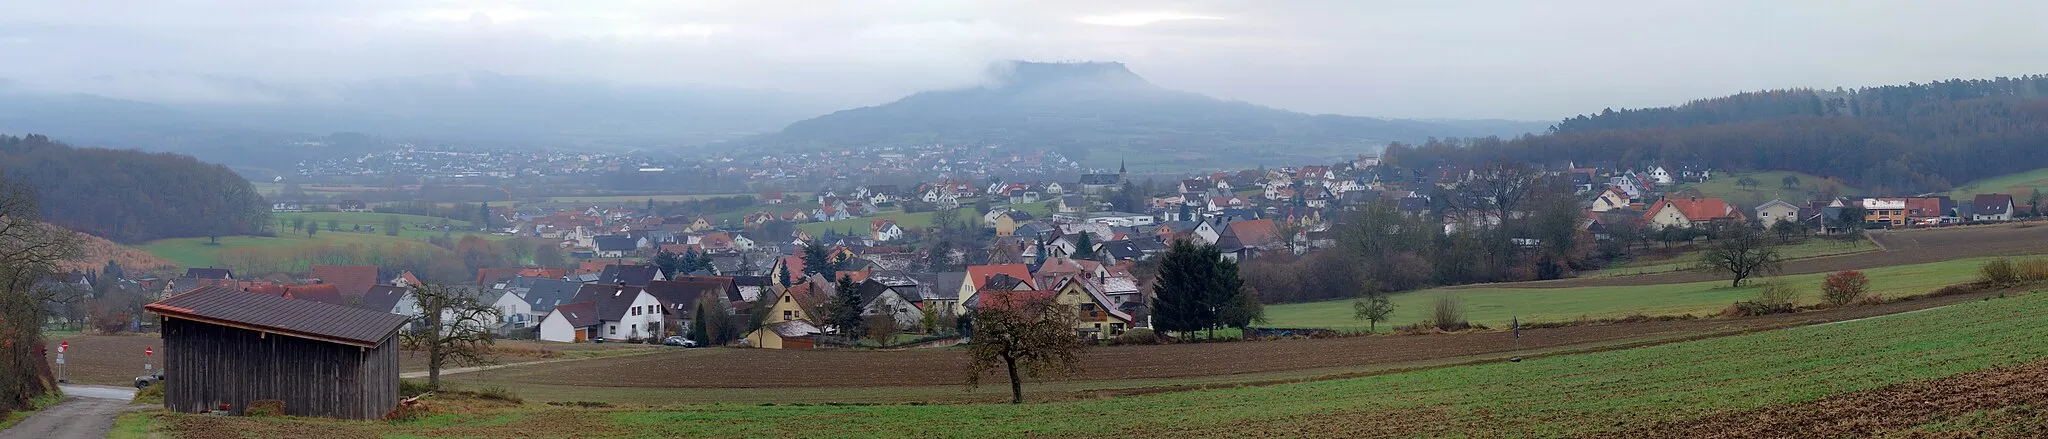 Photo showing: A panorama of Weilersbach, a town in northern Bavaria. In the foreground, its village of Mittlerweilersbach can be seen. Beyond it is its village of Unterweilersbach with its church St. Anna. In the background, partially obscured by clouds the hill Ehrenbürg is visible, and along its slopes the town of Kirchehrenbach can be seen.